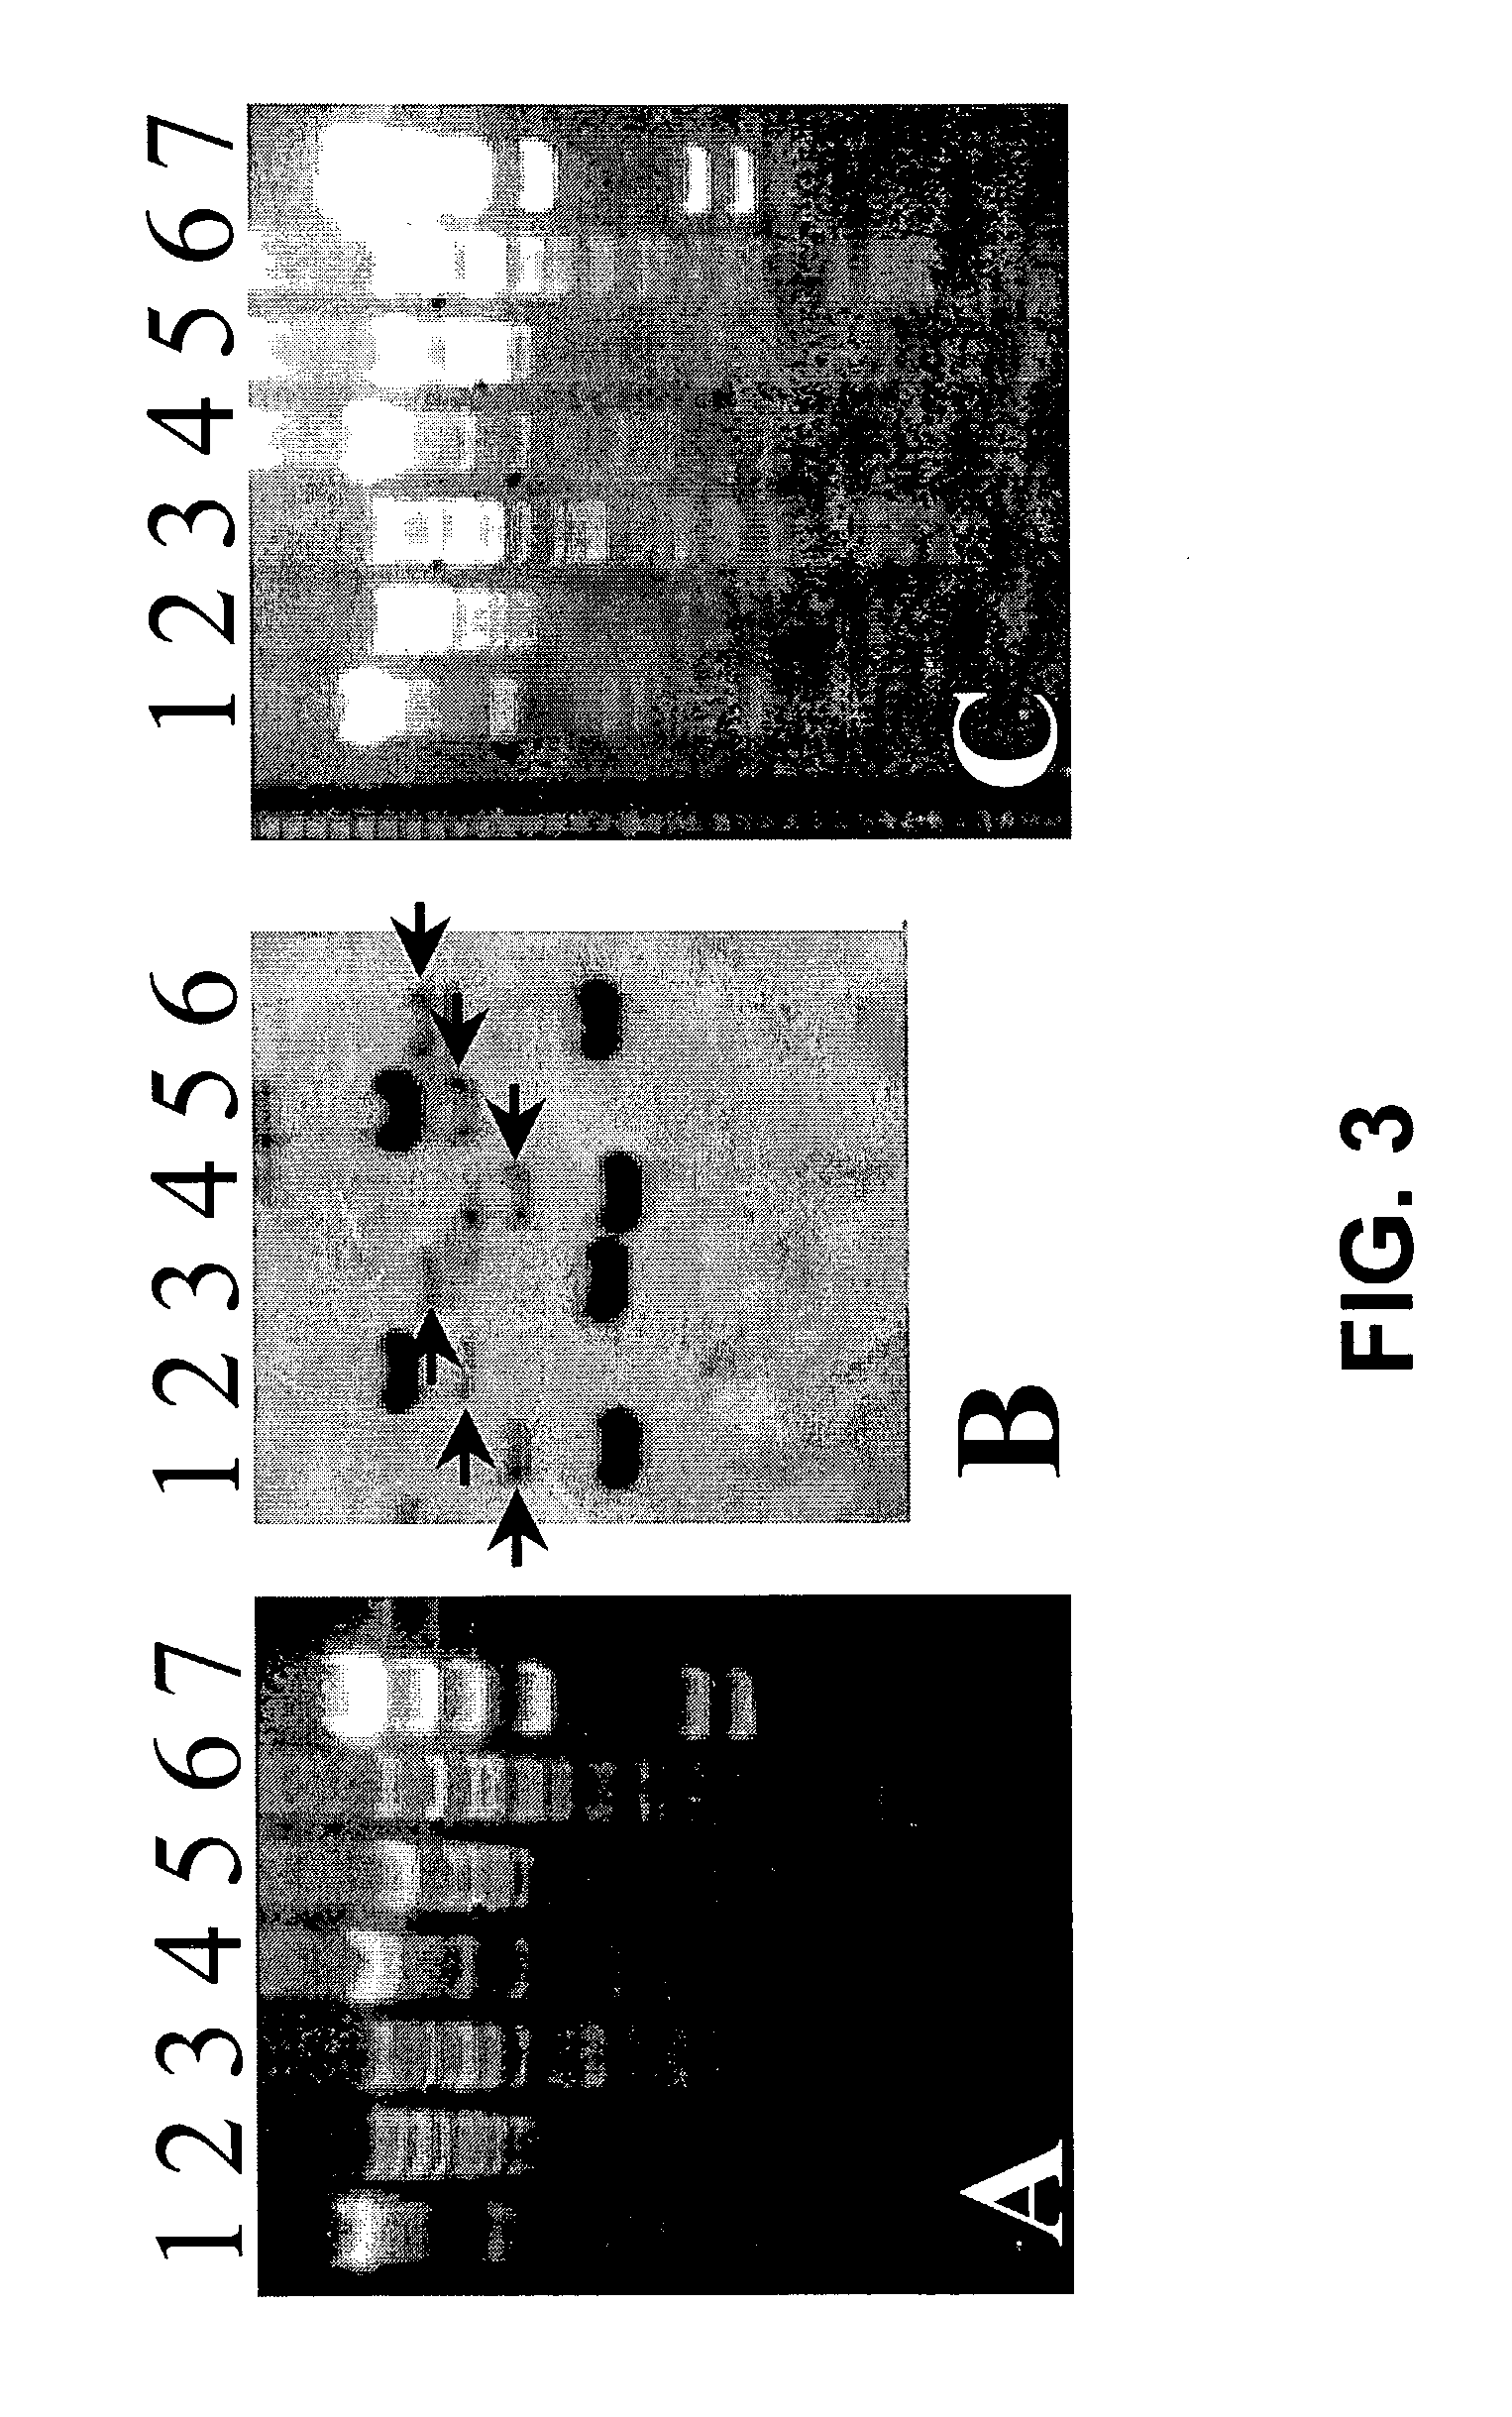 Transgenic screen and method for screening modulators of brain-derived neurotrophic factor (BDNF) production